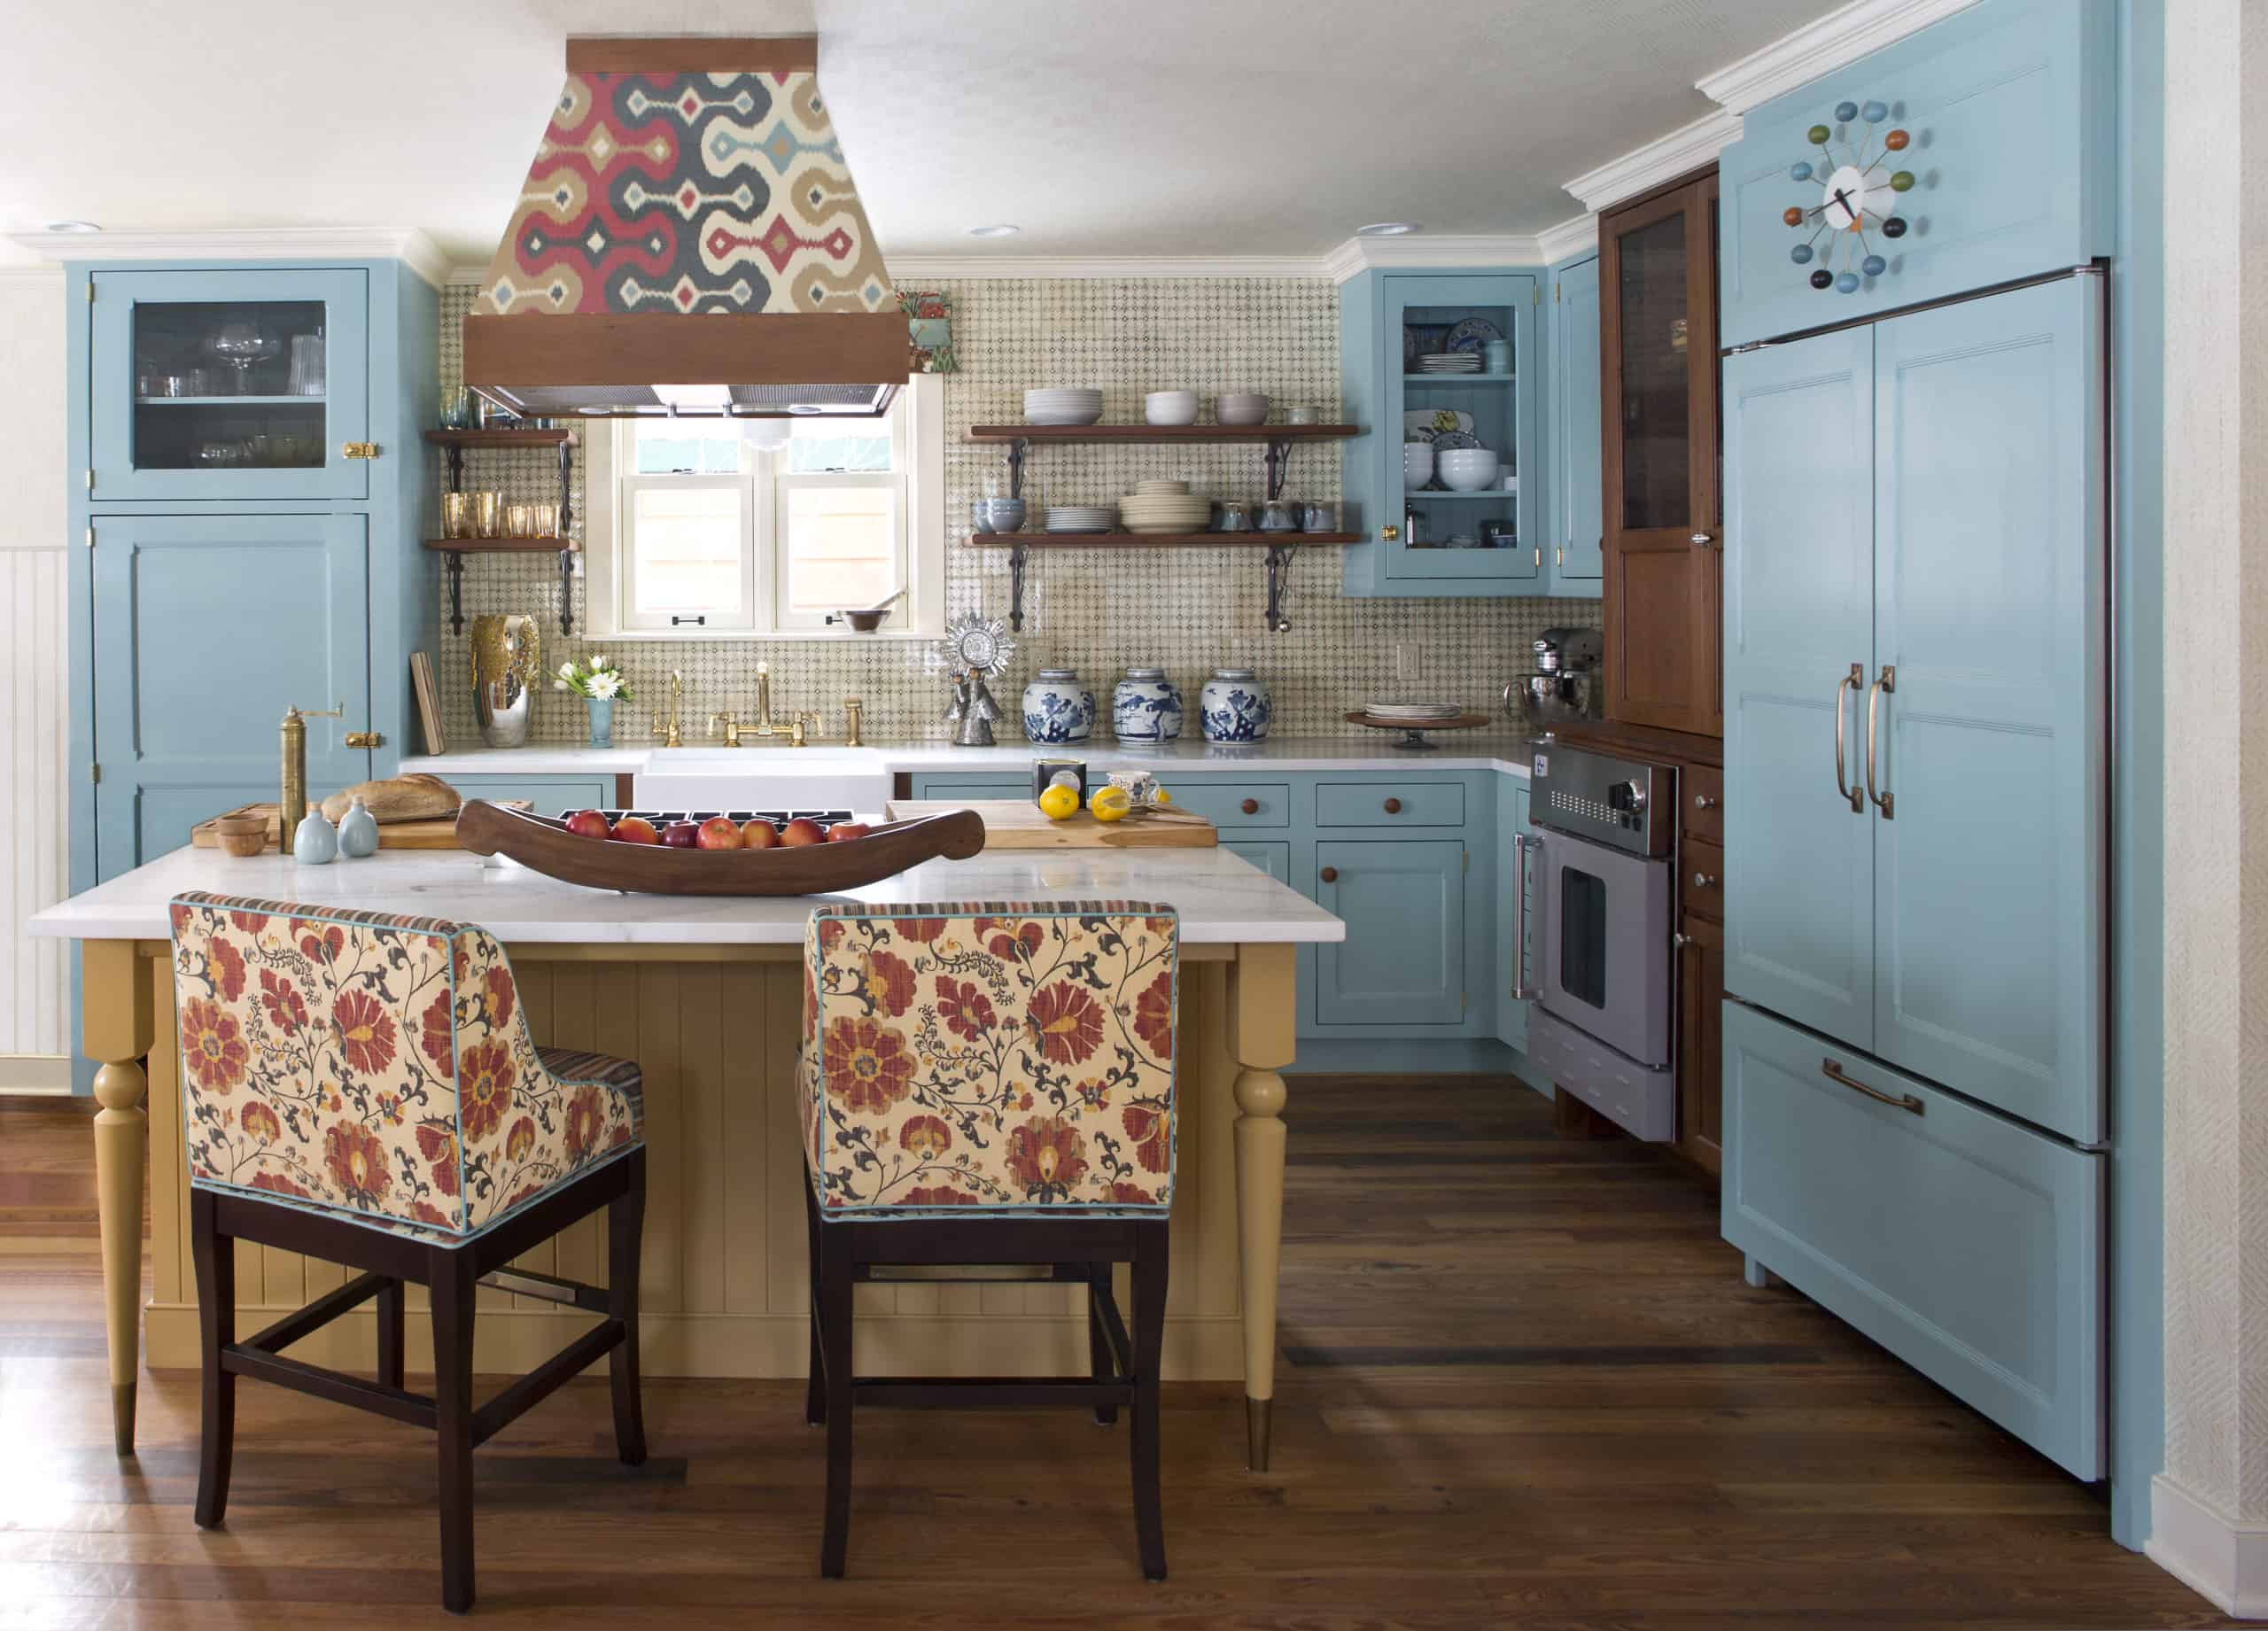 Colorful kitchen design with turquoise blue cabinets